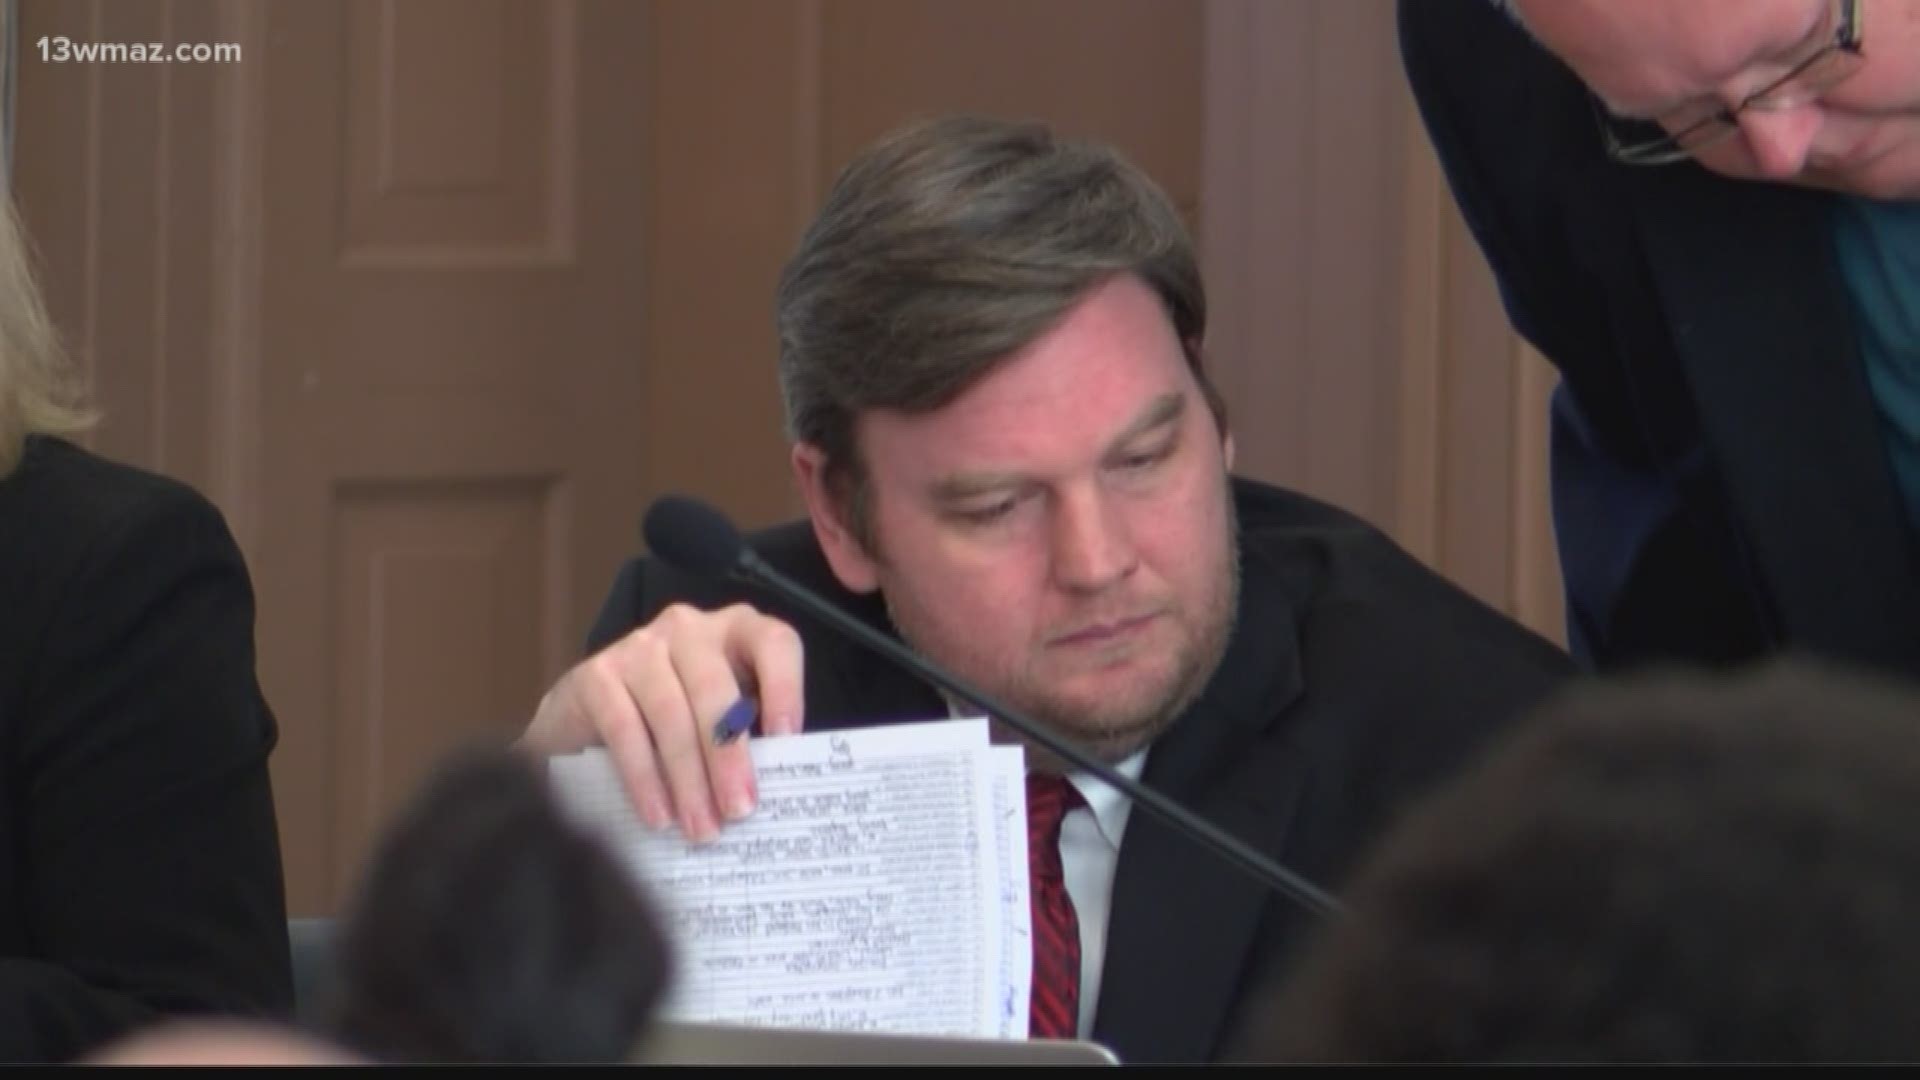 Jury selection took up the majority of the day and opening statements began around 5 p.m. Monday afternoon. Cordele Circuit Distirct Attorney Brad Rigby made the opening statement for the prosecution telling the jury that Ryan Duke allegedly killed Tara and Bo helped burn her body.